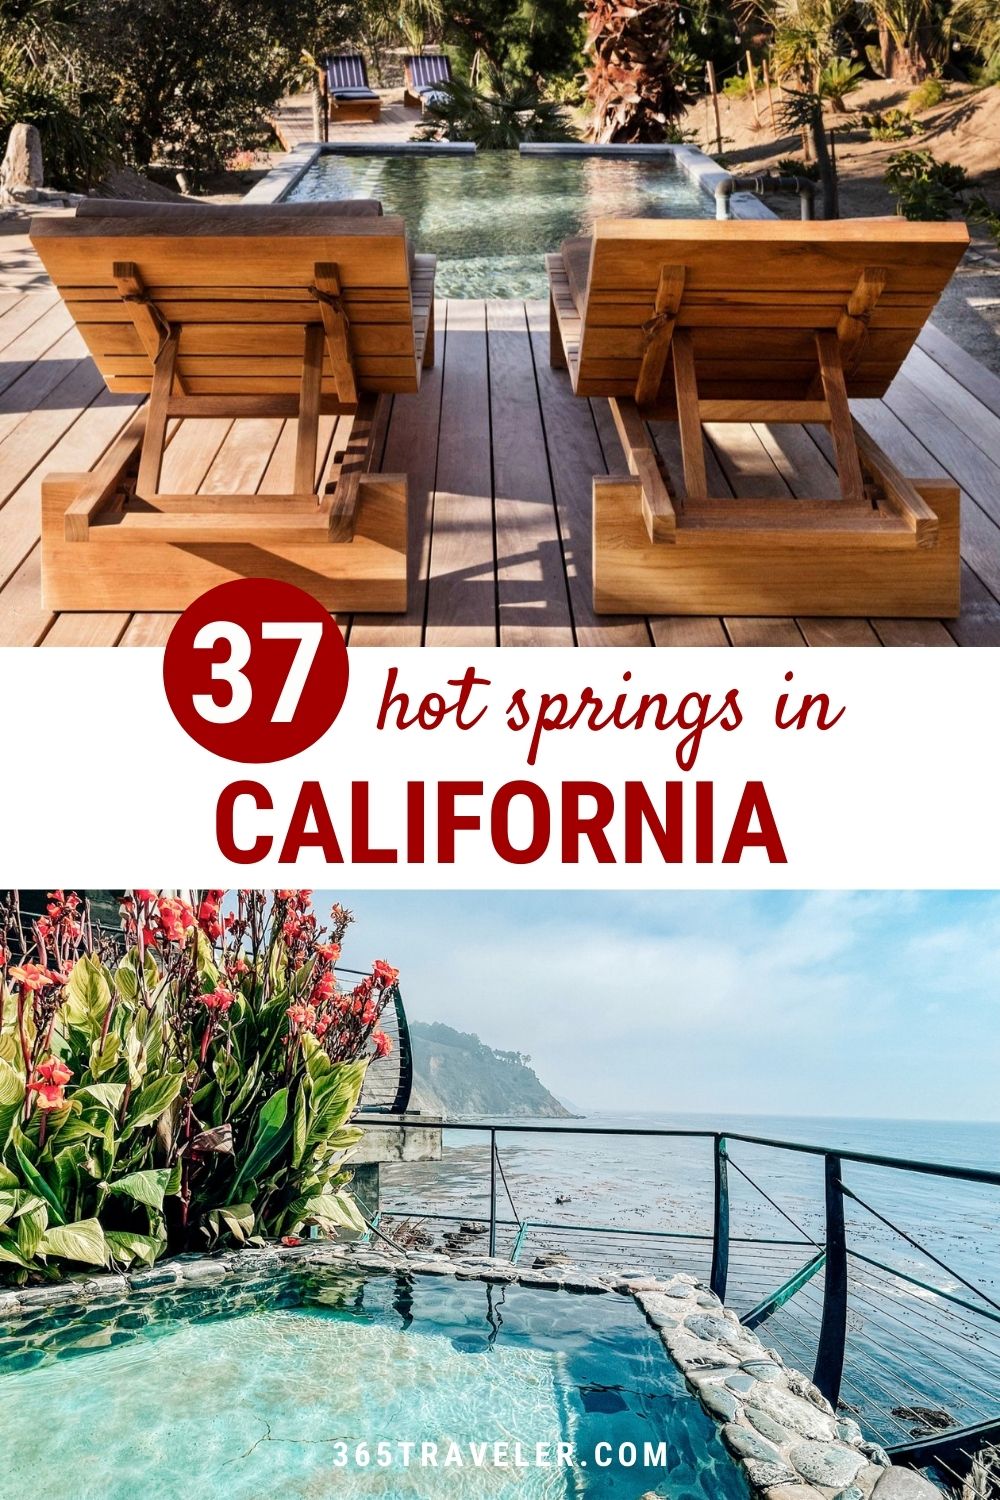 37 BEST HOT SPRINGS CALIFORNIA HAS TO OFFER